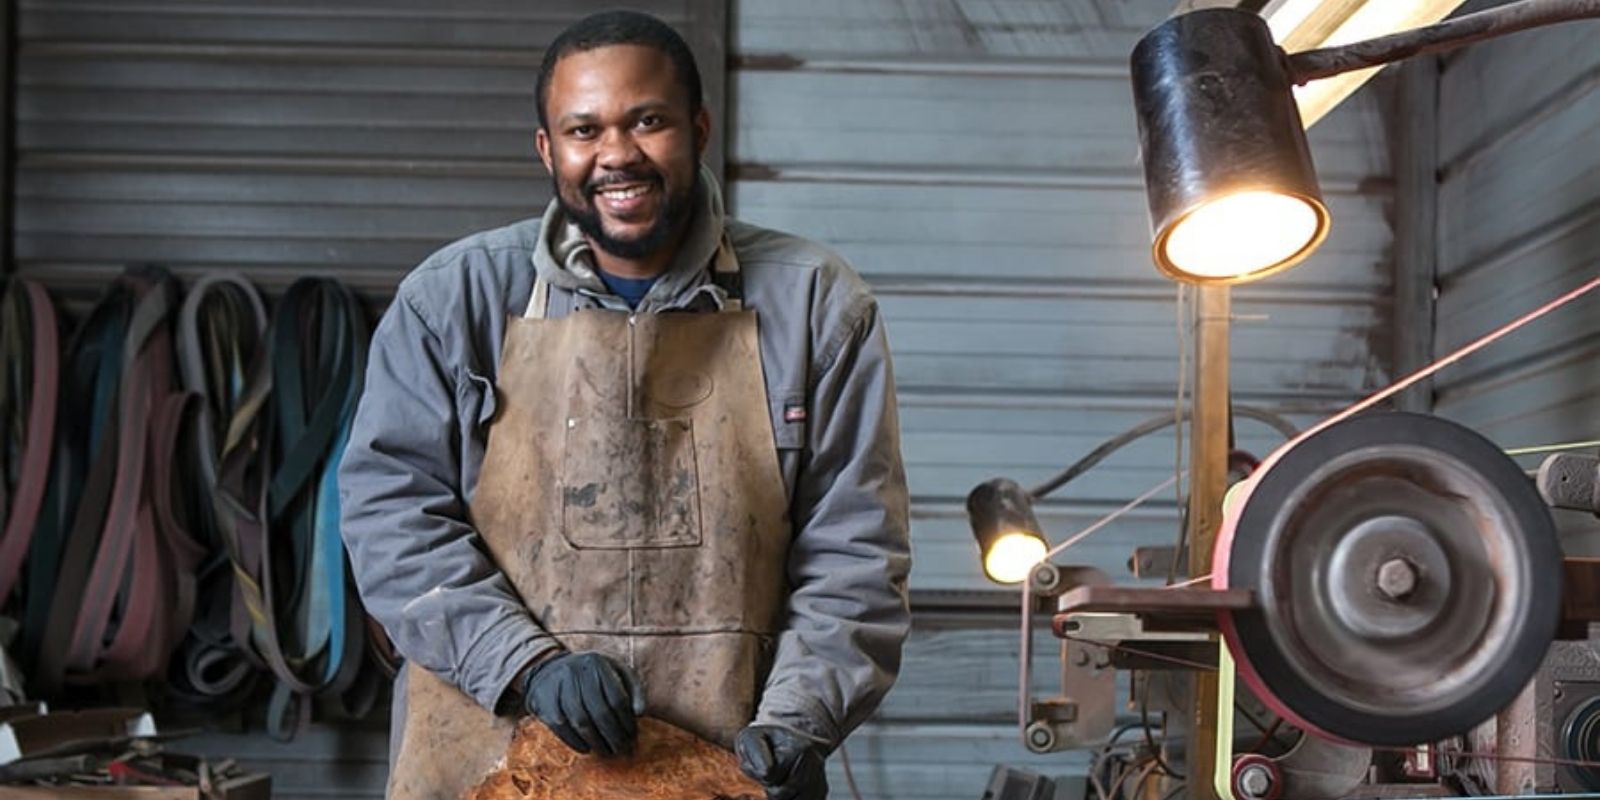 Quintin Middleton of the Southern black-owned business, Middleton Made Knives